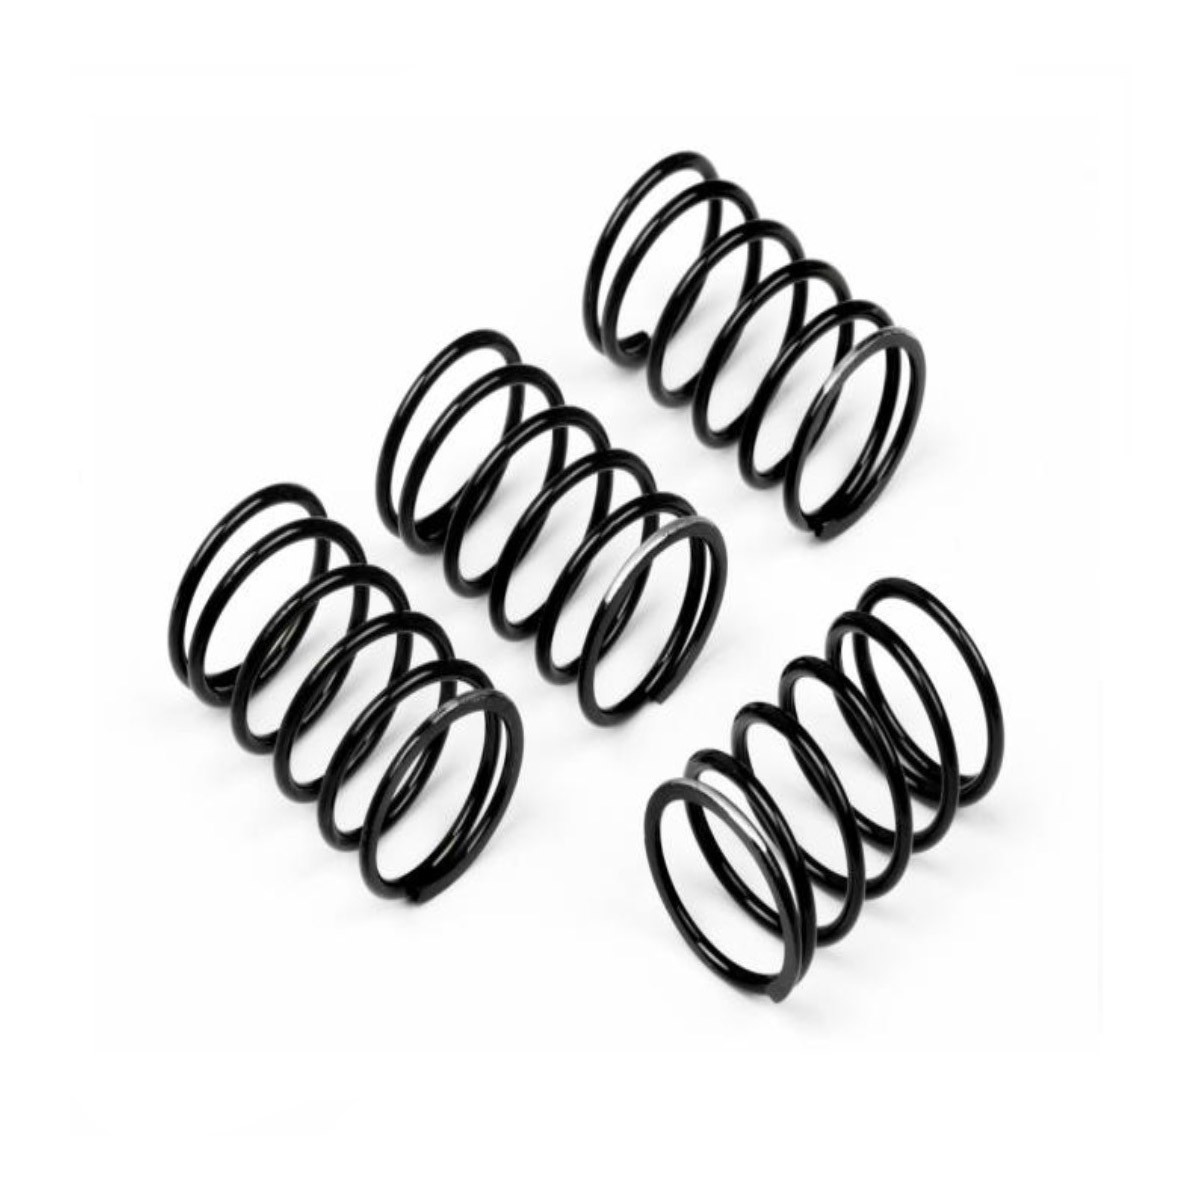  Replacement springs (factory height) for Nissan Almera N15 1.6 Kayaba (8/1997-2000) Image 1